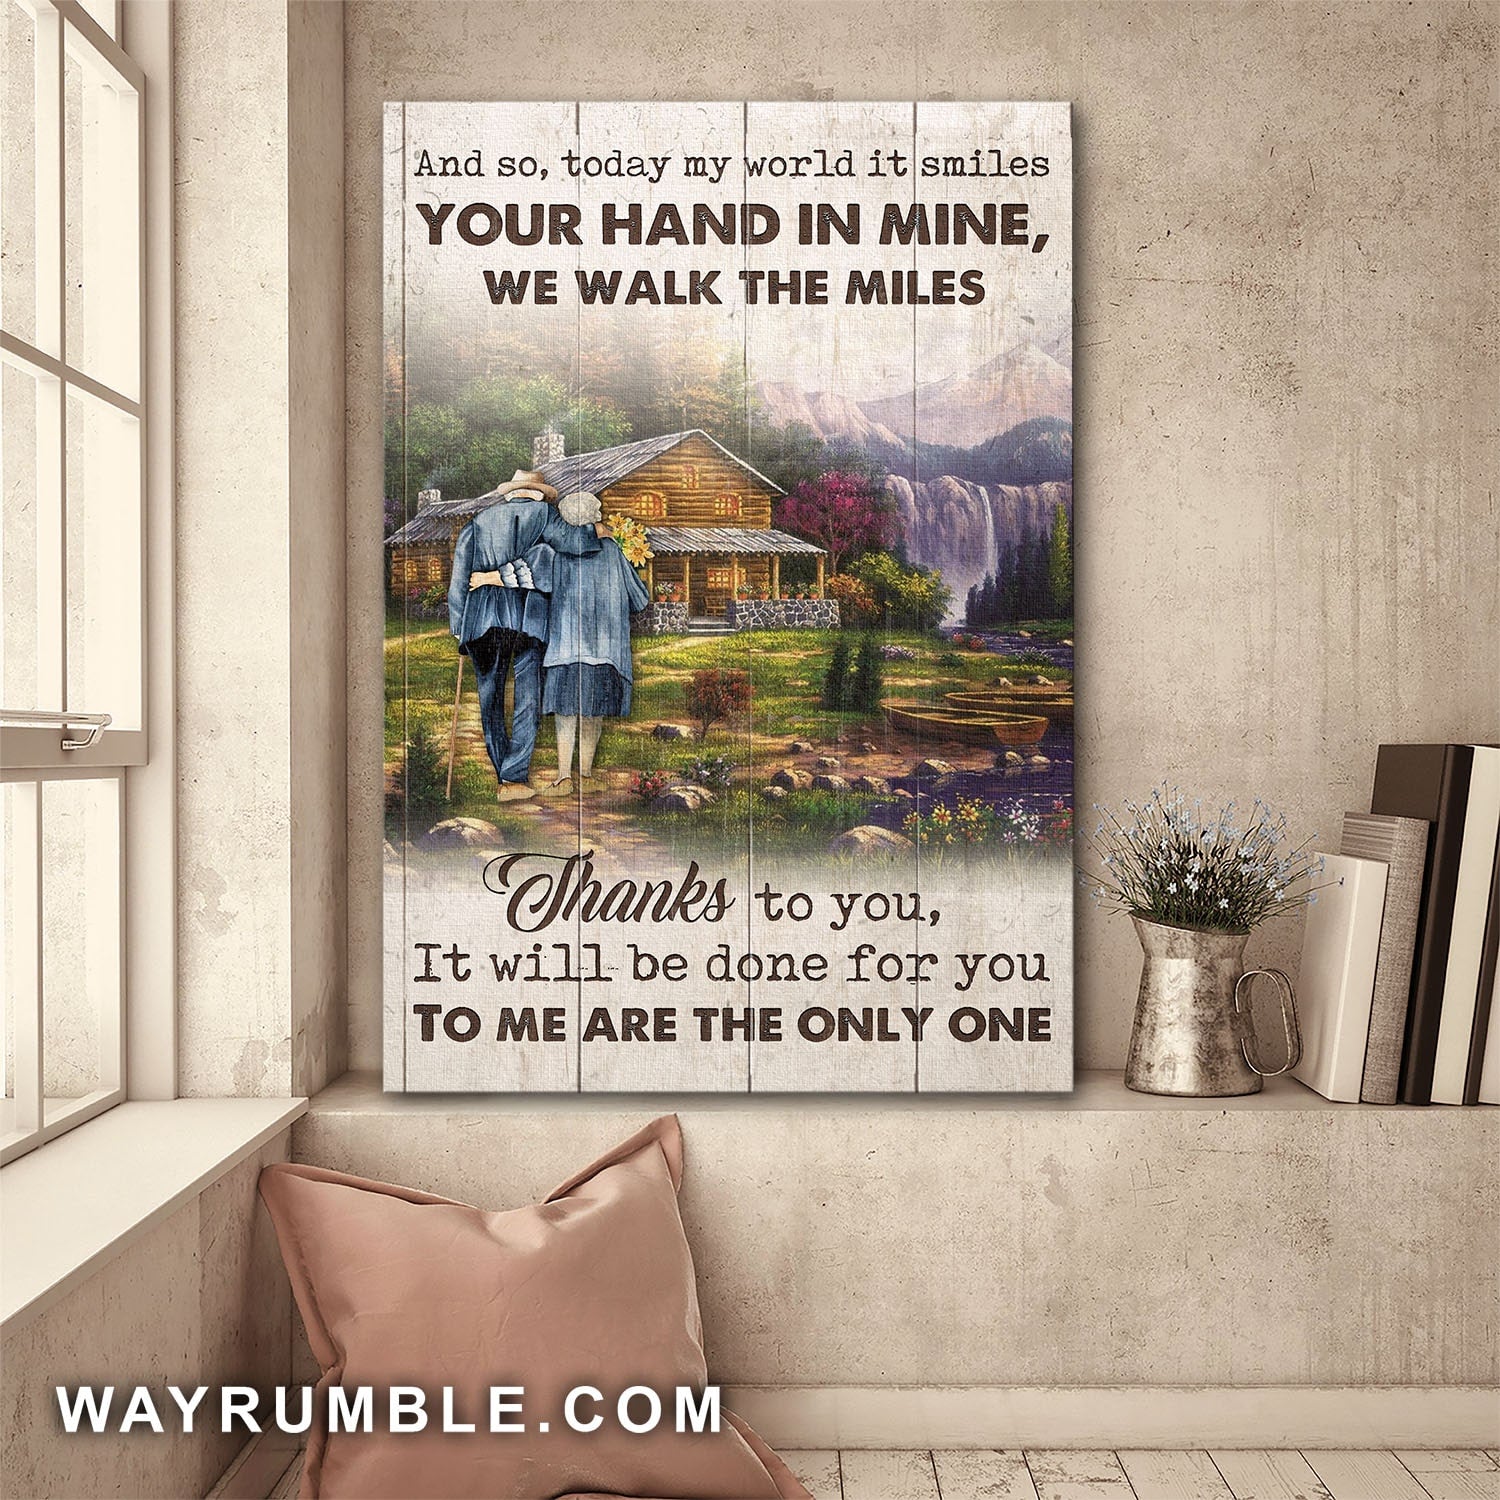 Old couple walking, Green house, Your hand in mine, we walk the miles - Couple Portrait Canvas Prints, Wall Art